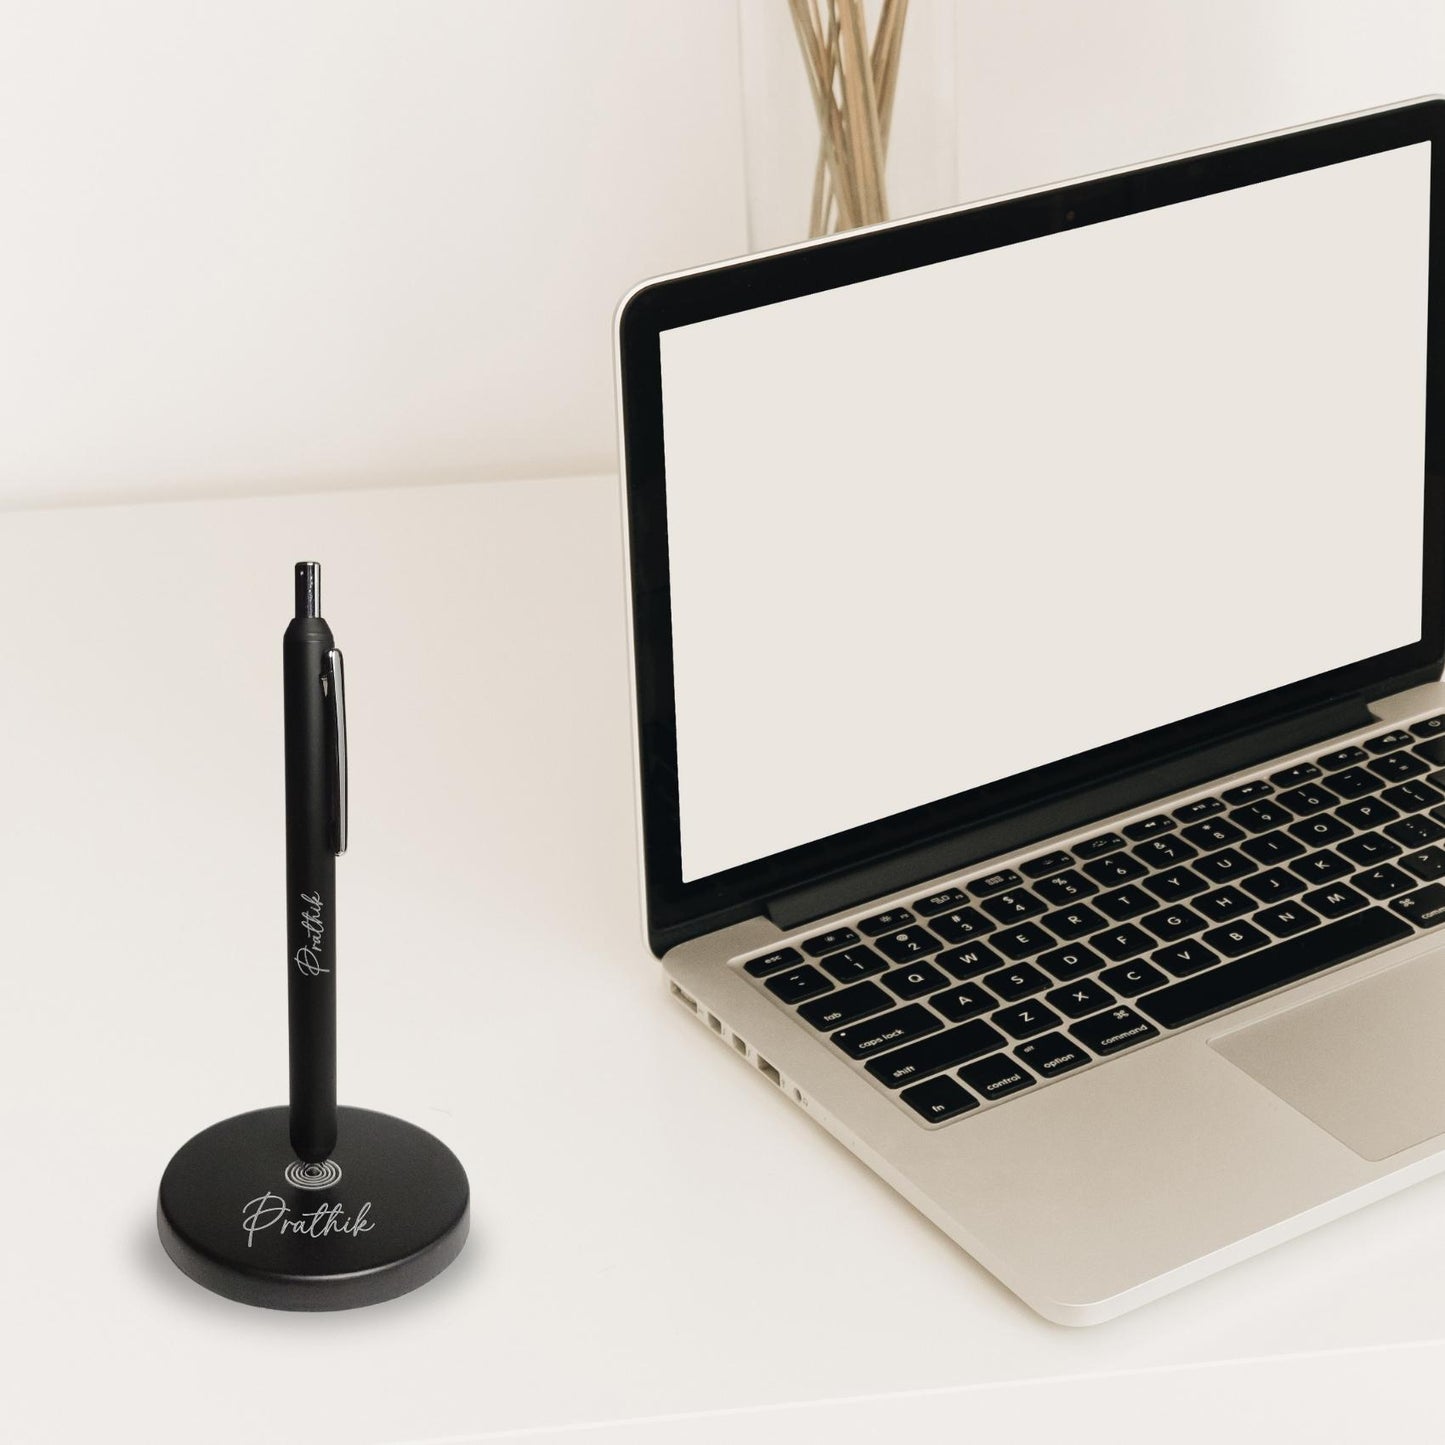 Customized Magnetic Pen With Stand - Black